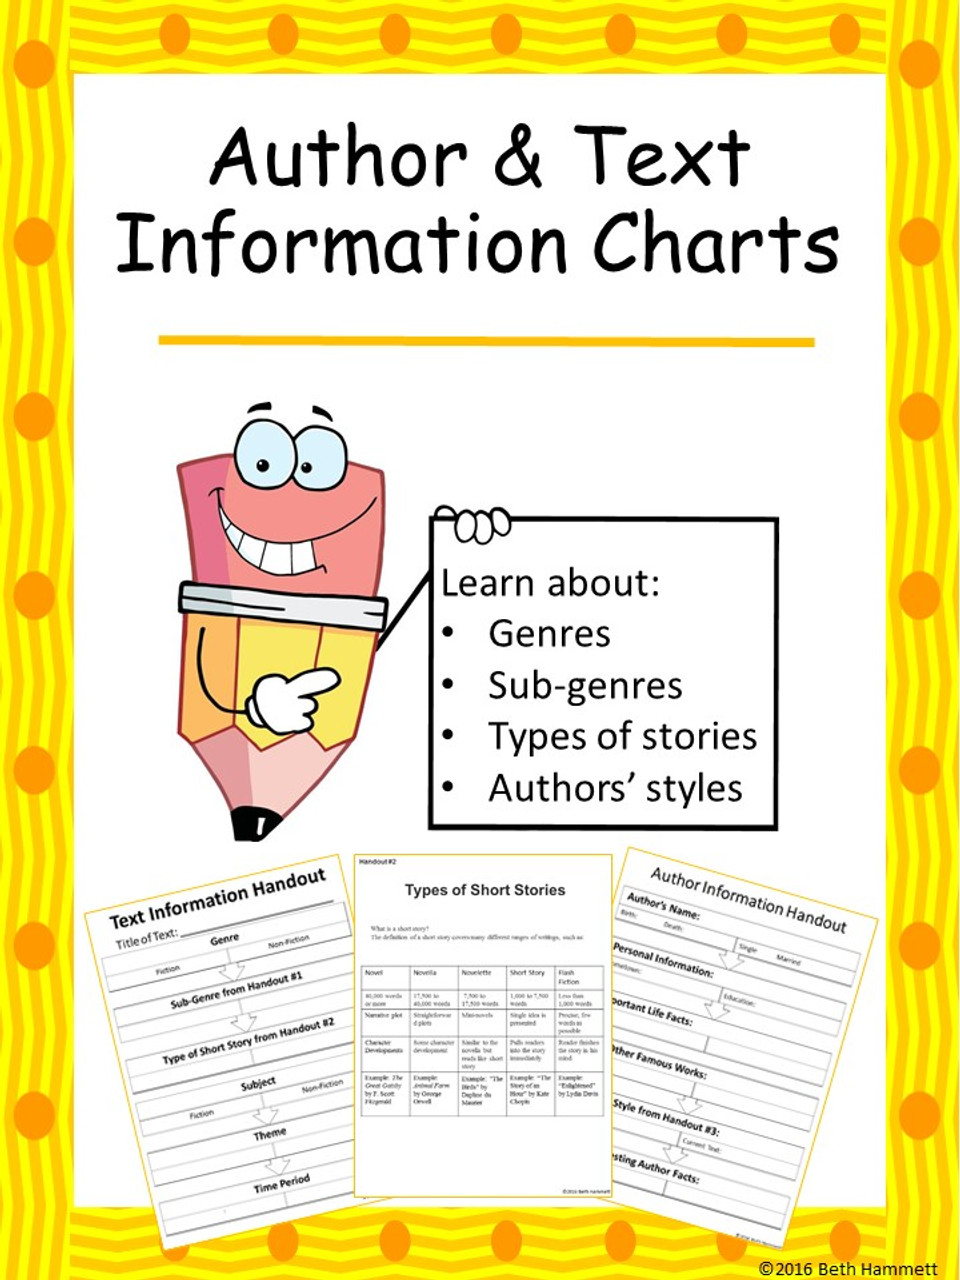 Author and Text Information Charts